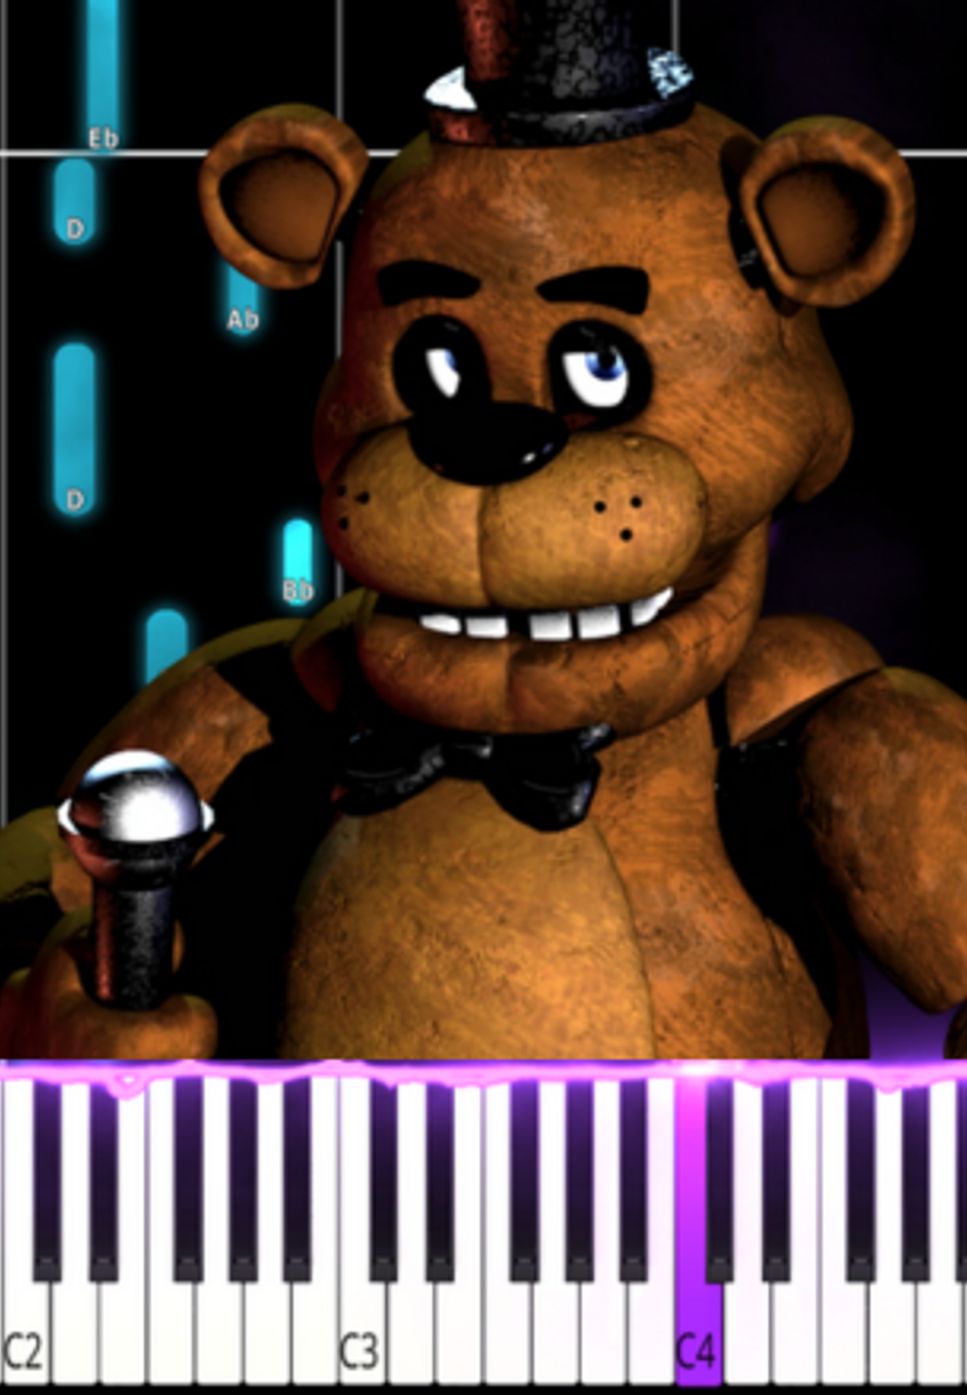 Five Nights at Freddy's 2 song - It's been so long by Marco D.